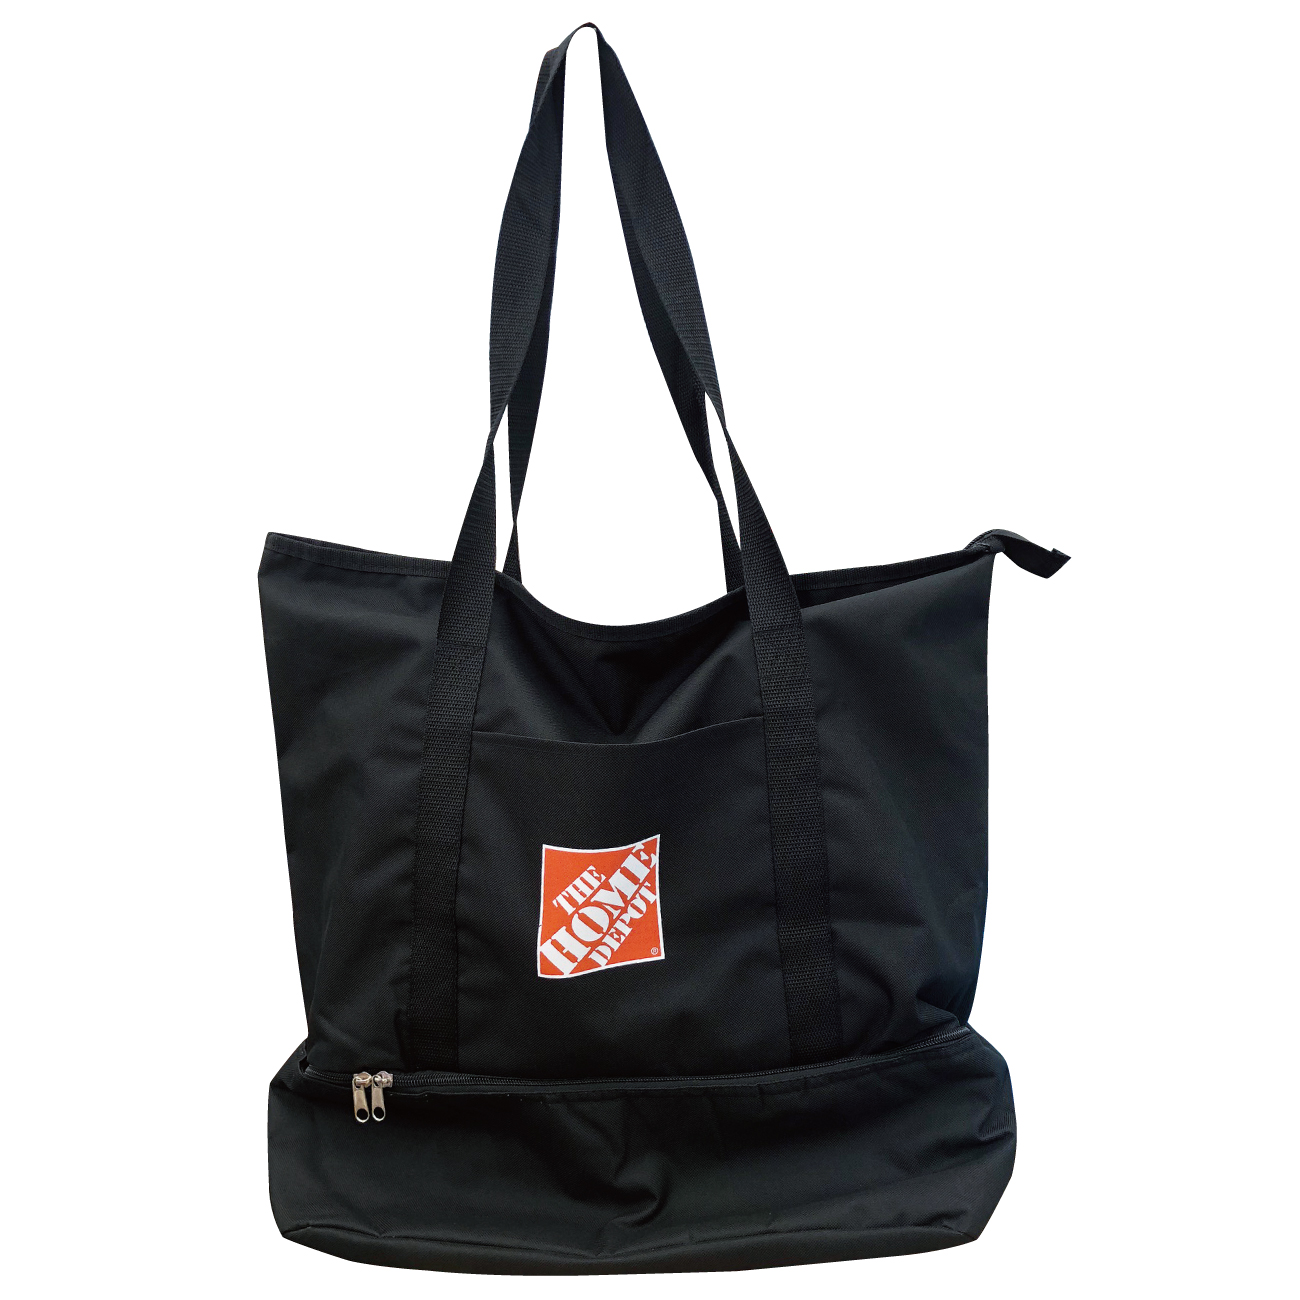 HOMEDEPOT COOLER TOTE BAG　ホームデポ　バッグ